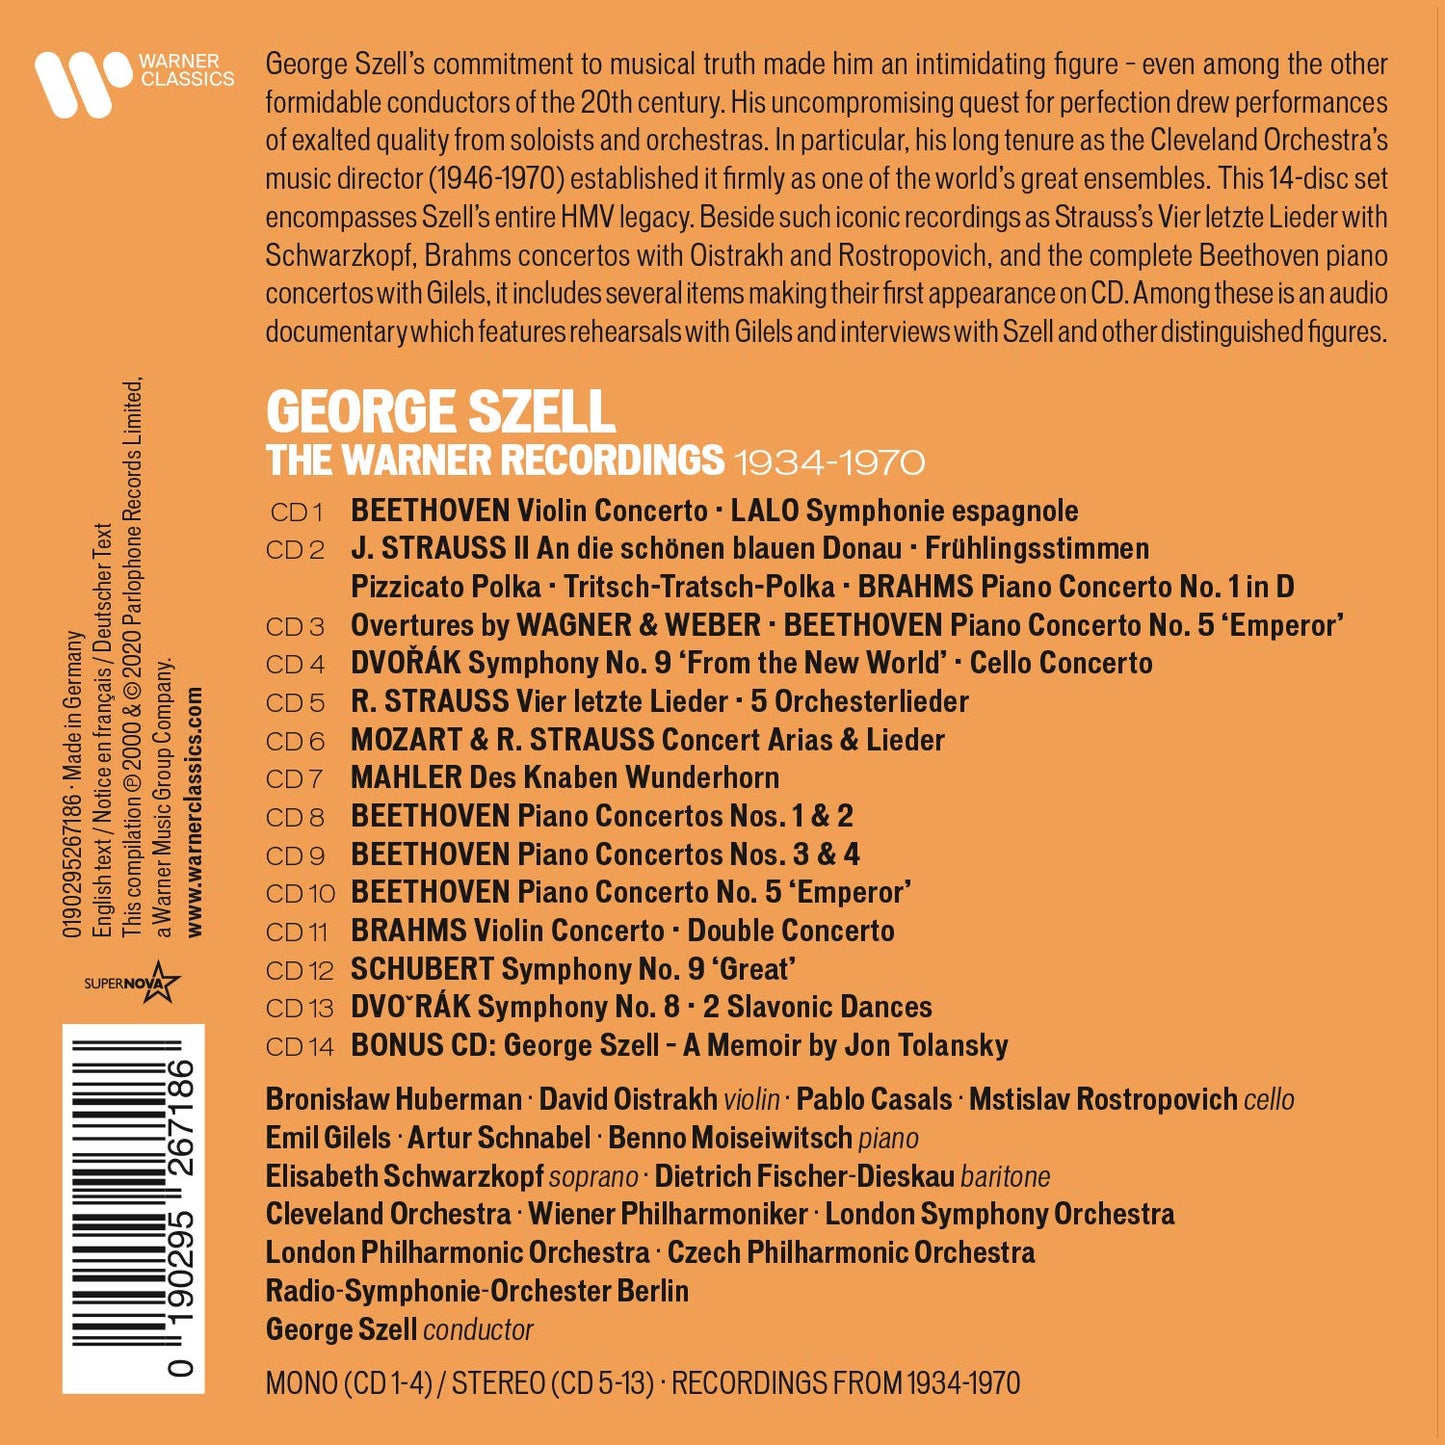 GEORGE SZELL: THE WARNER RECORDINGS 1934-1970 (14 CDS)